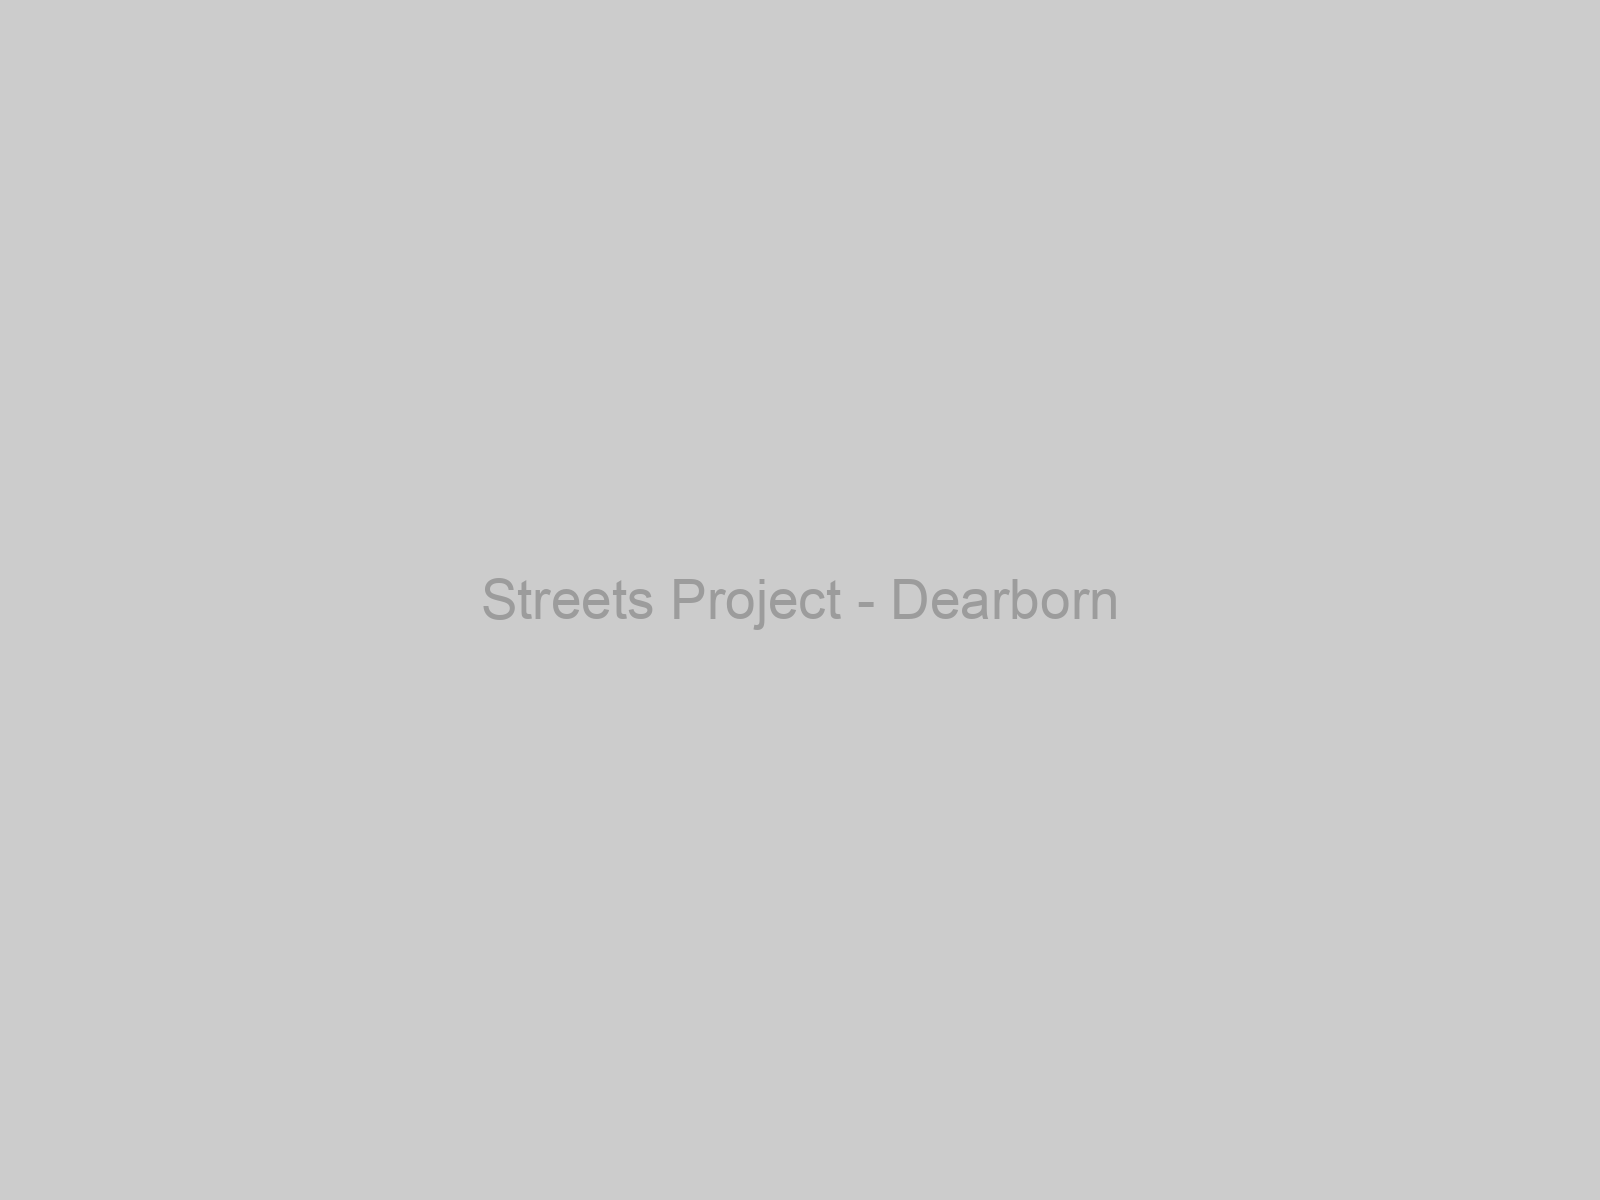 Streets Project - Dearborn